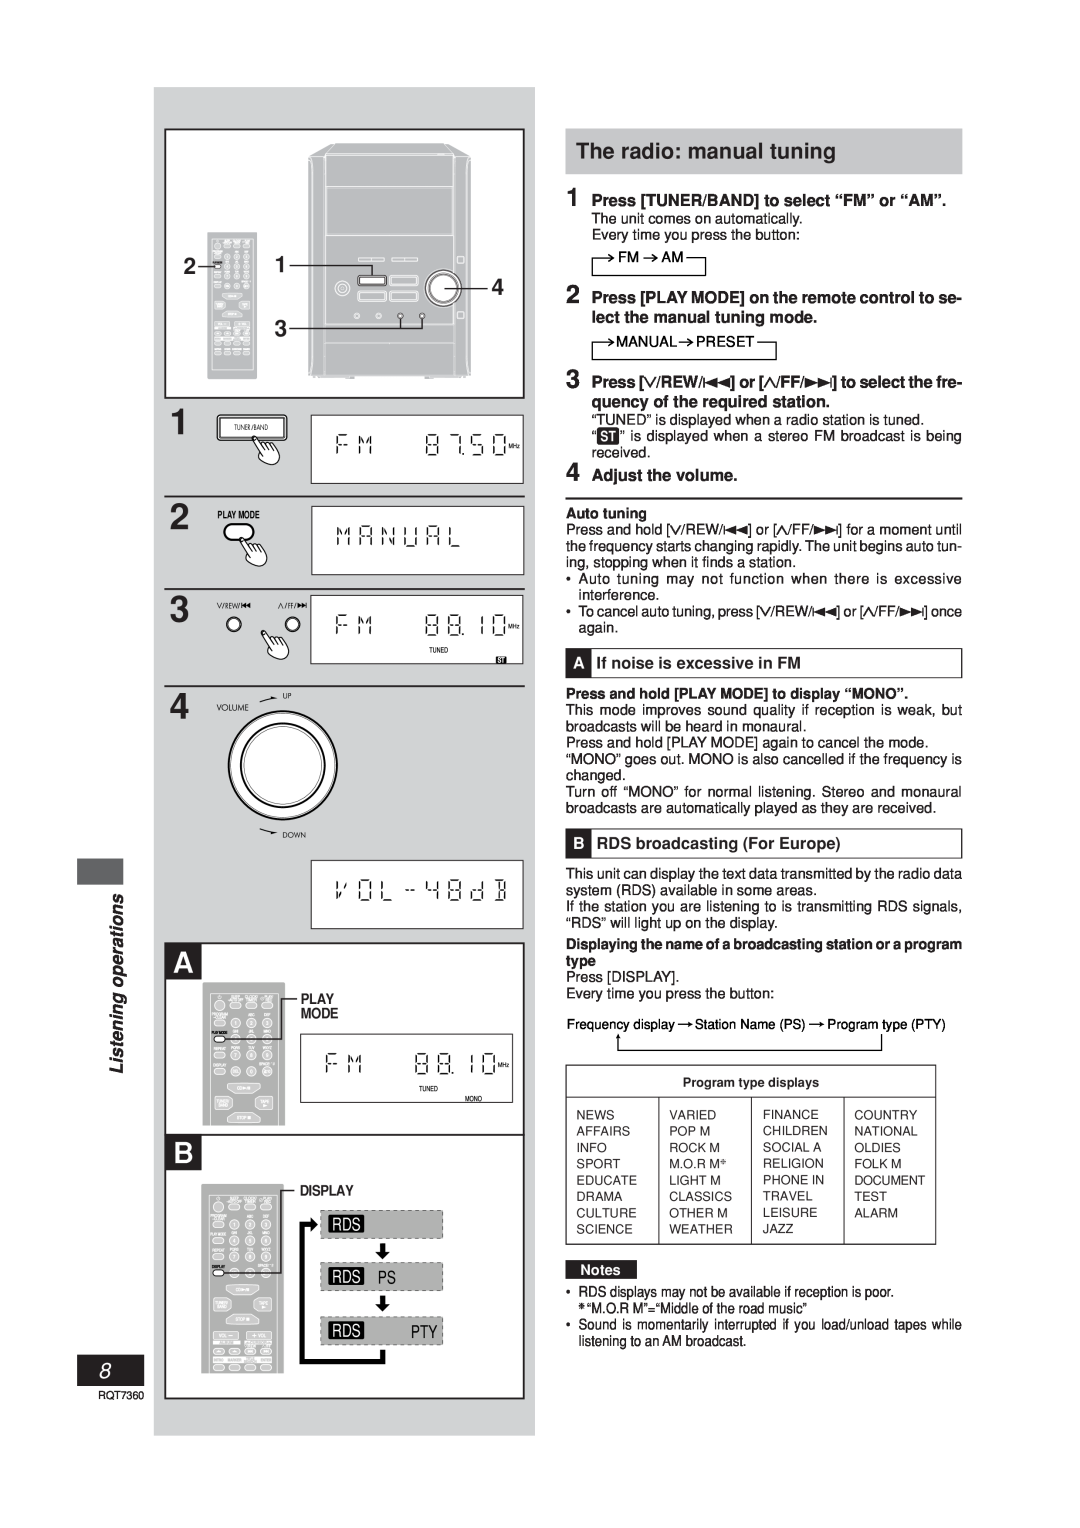 Panasonic SC-PM9 The radio manual tuning, Listening operations, Press TUNER/BAND to select “FM” or “AM”, Adjust the volume 